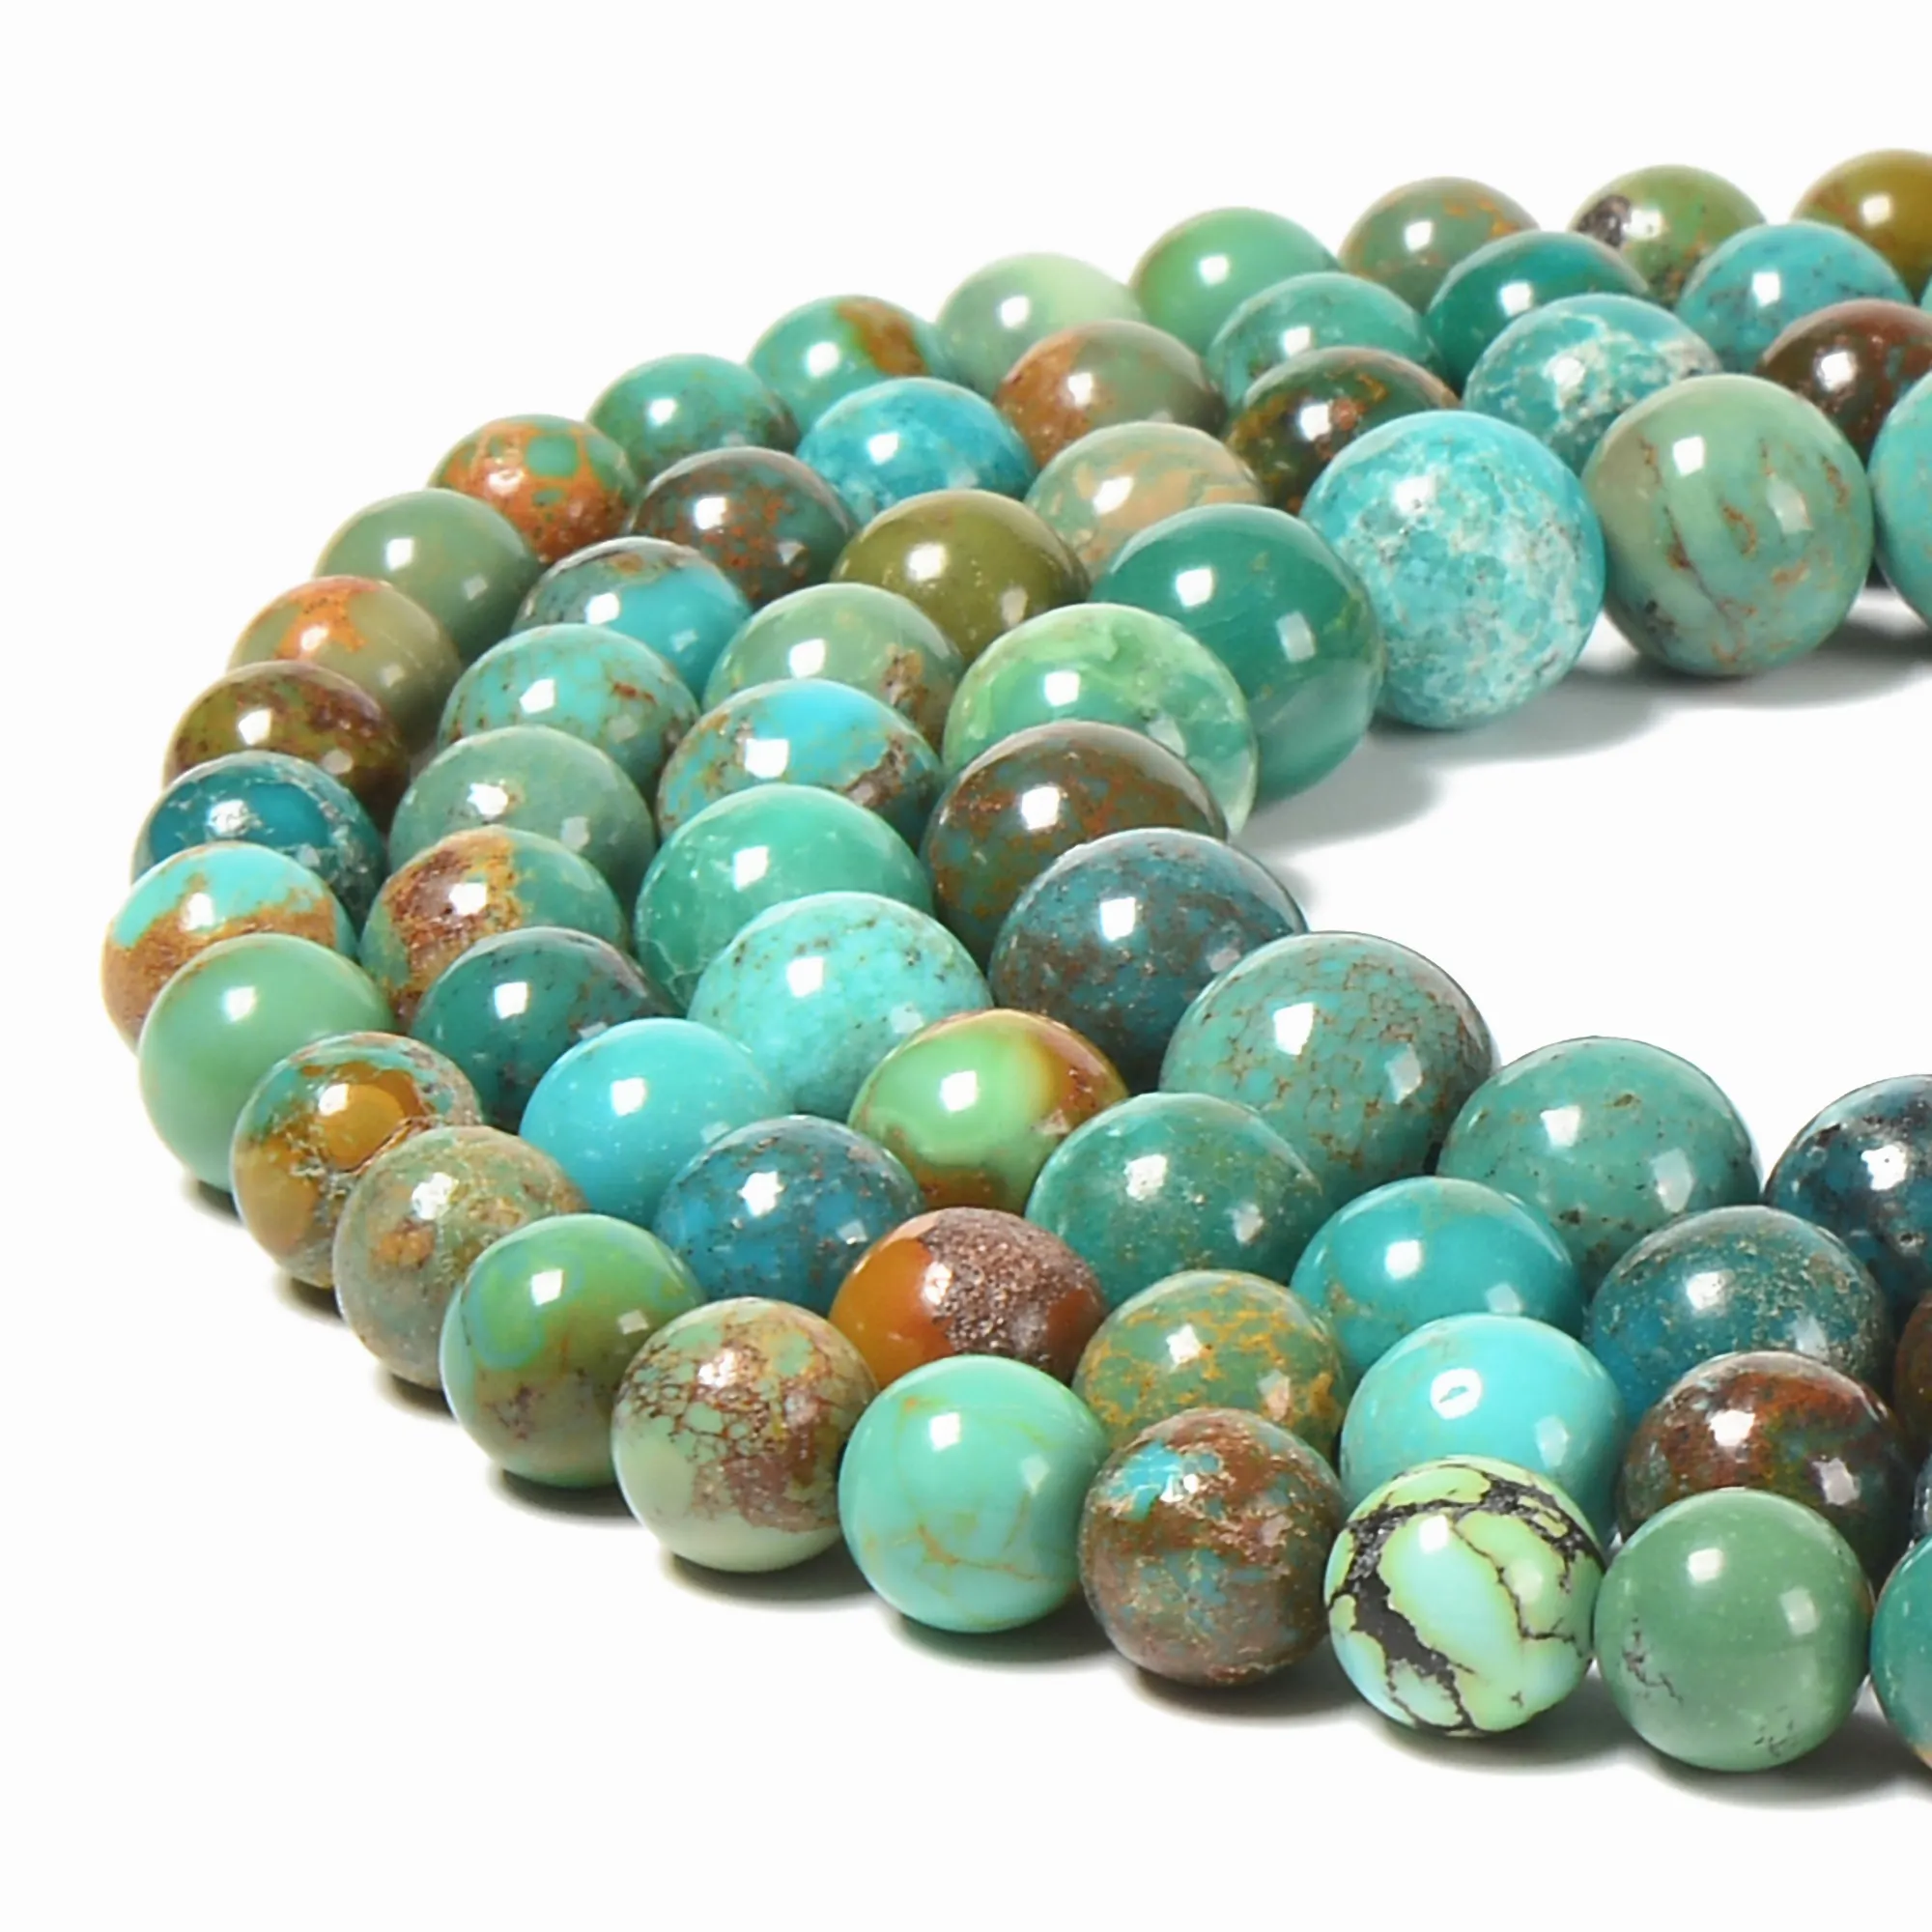 Bulk Natural Blue Green Turquoise Round Loose Gemstone Stones Beads for DIY Decor Jewelry Bracelet Necklace Making 4 6 8 10 mm